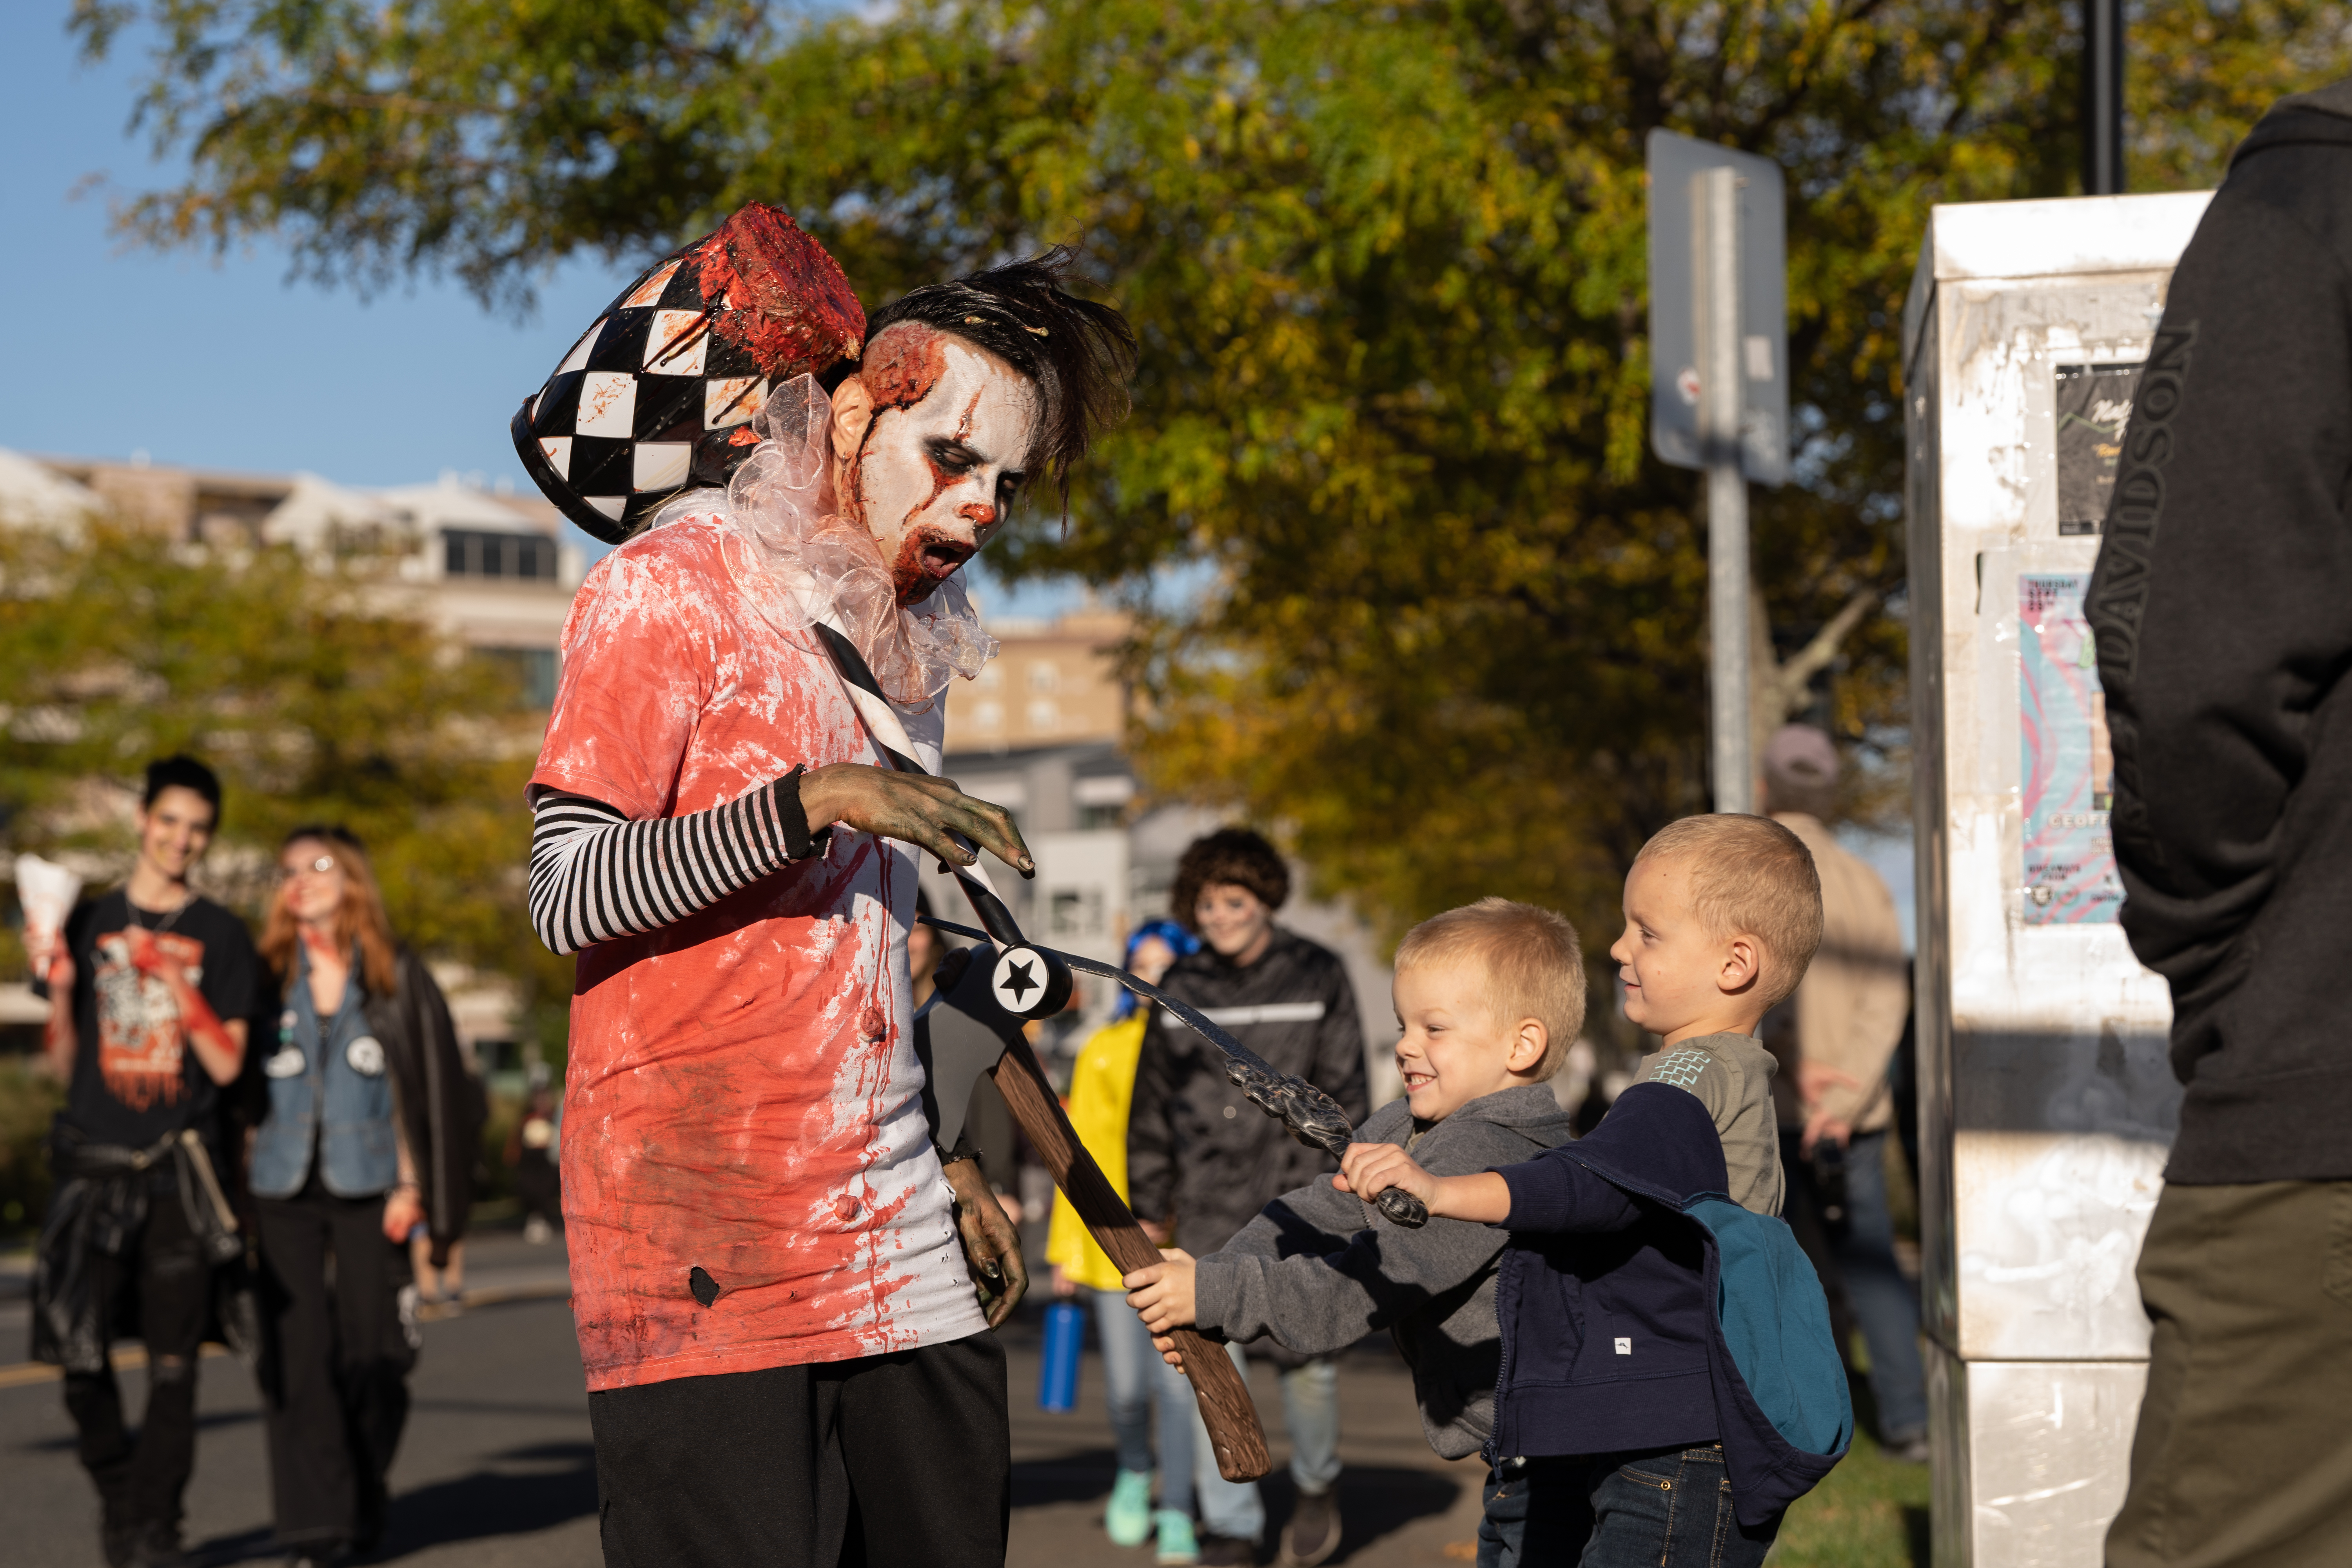 Two children defend themselves from a zombie during the 14th Asbury Park Zombie Walk in Asbury Park on Saturday, October 8, 2022. The zombie walk held its first themed year with the theme being 80's and 90's punk and metal.